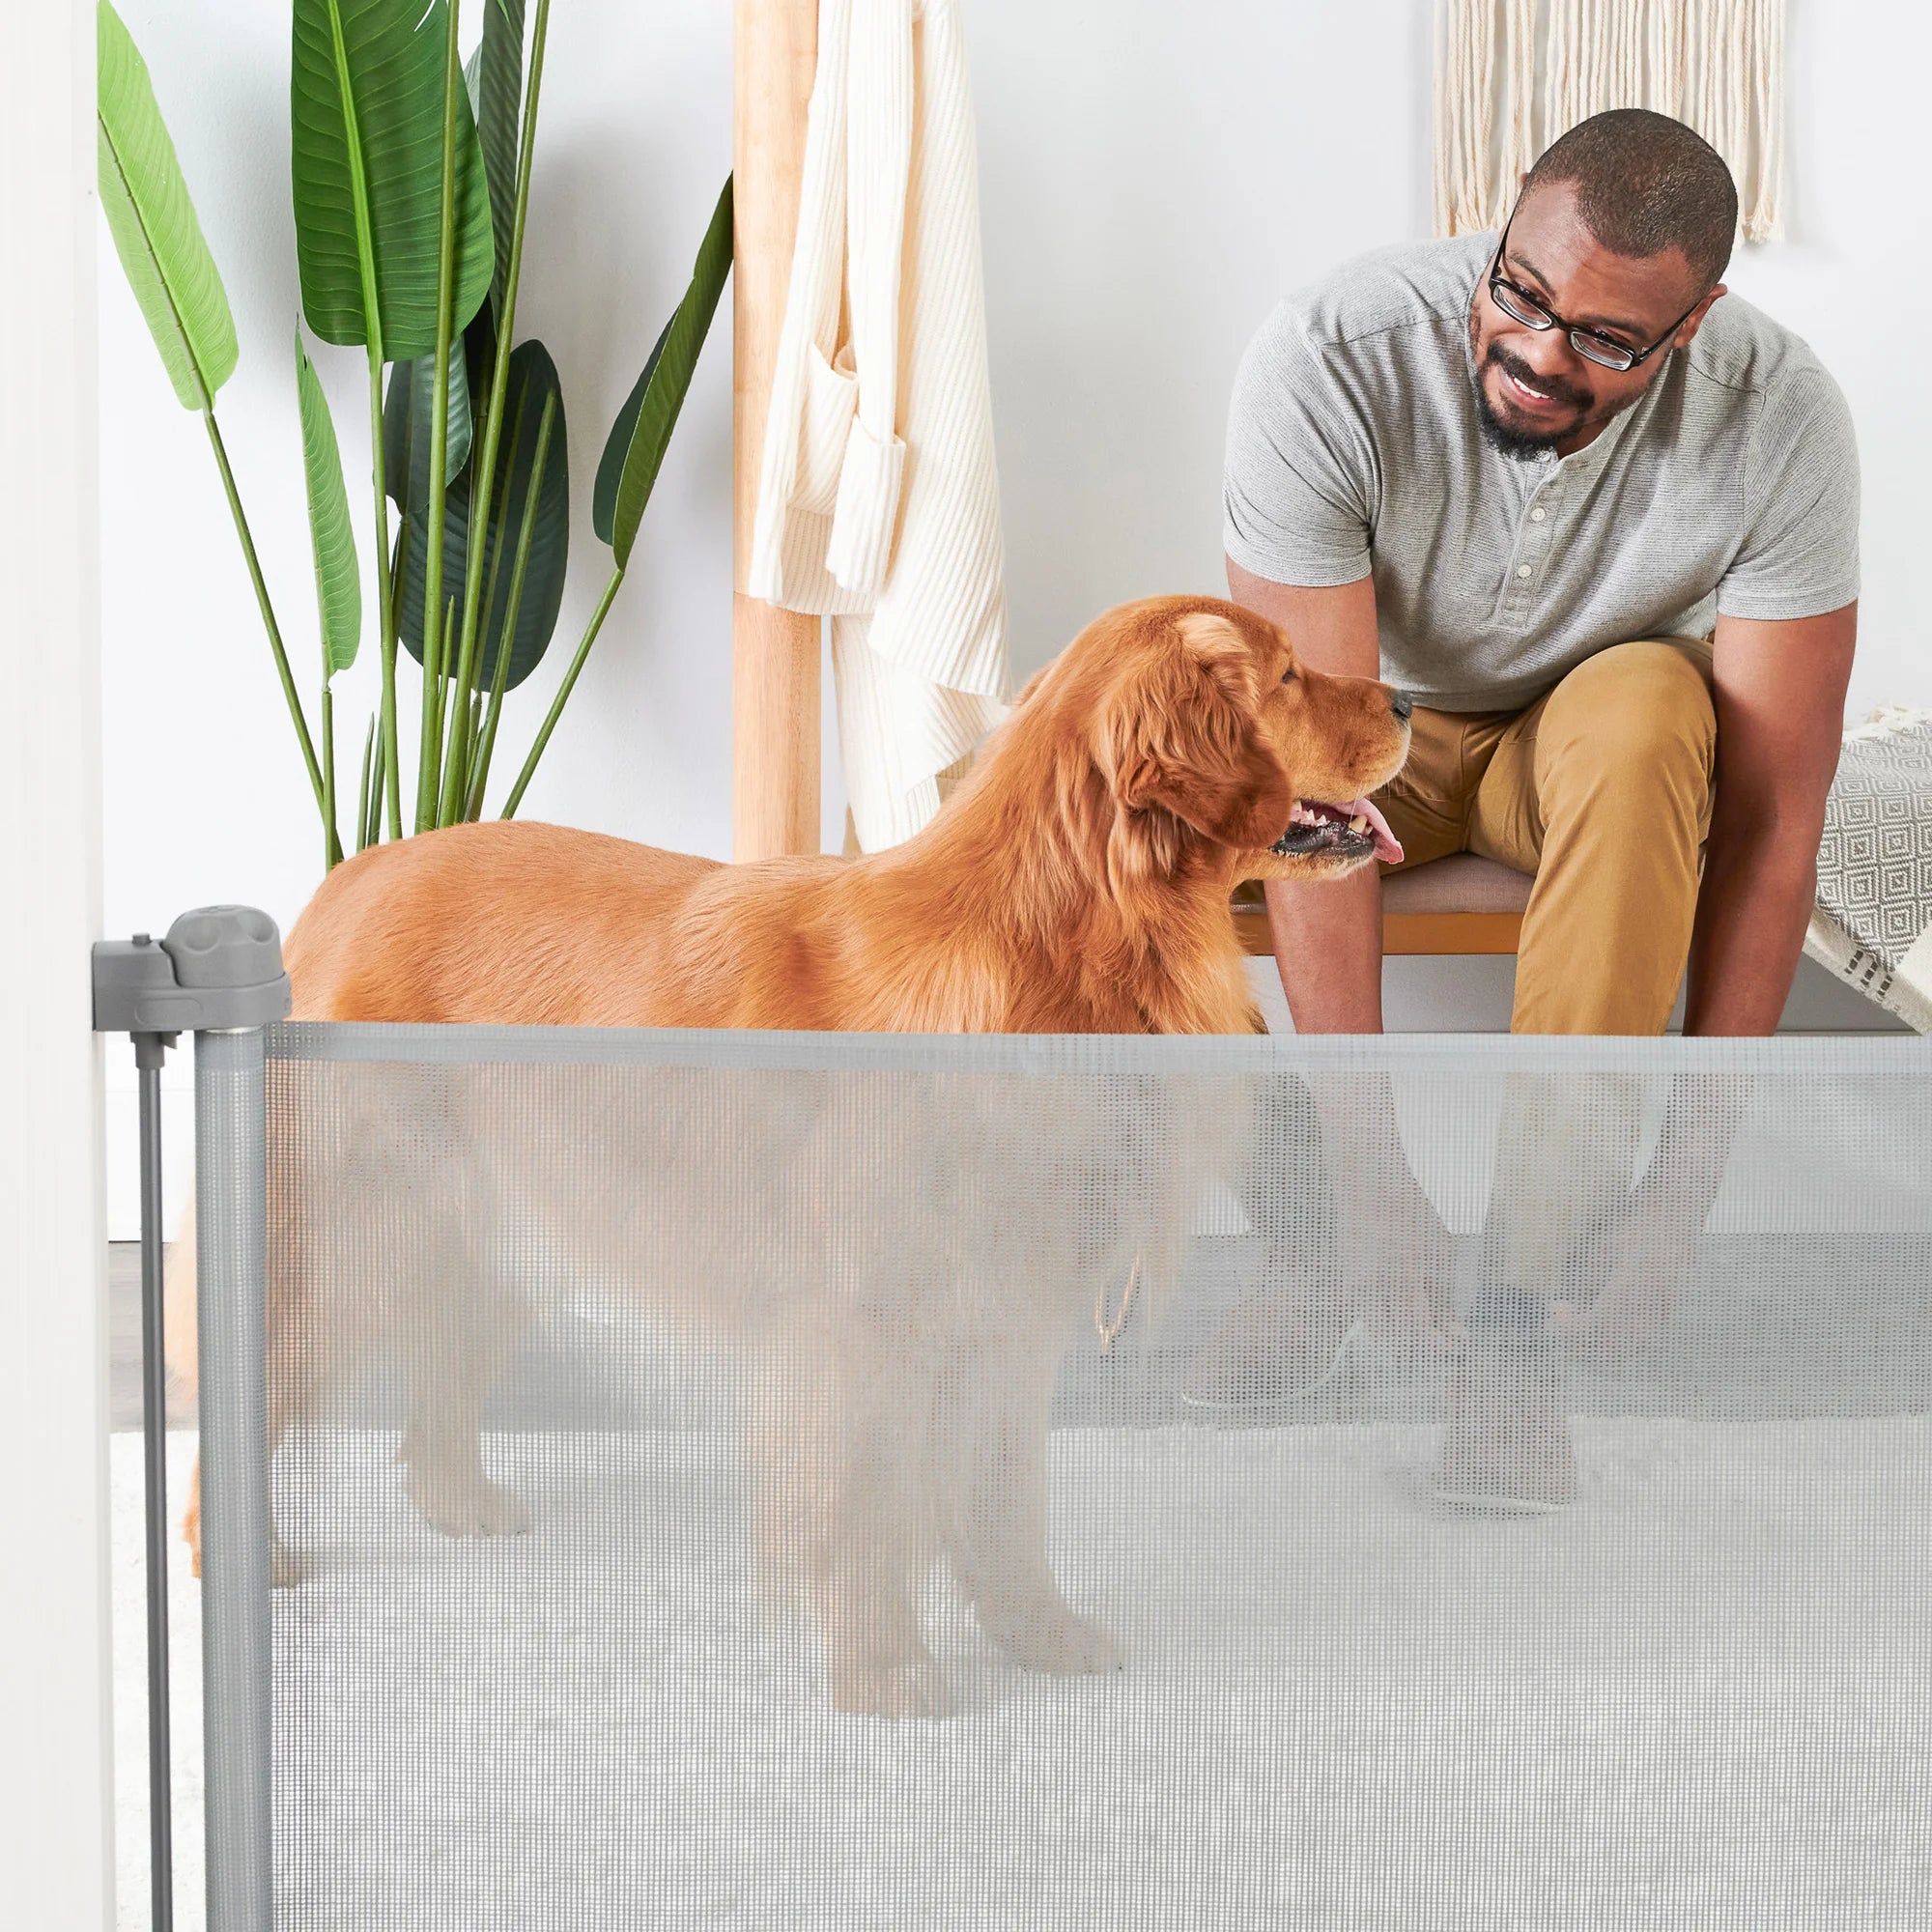 Dog looking at owner who is tying his shoes behind Retractable Pet Gate in mud room.